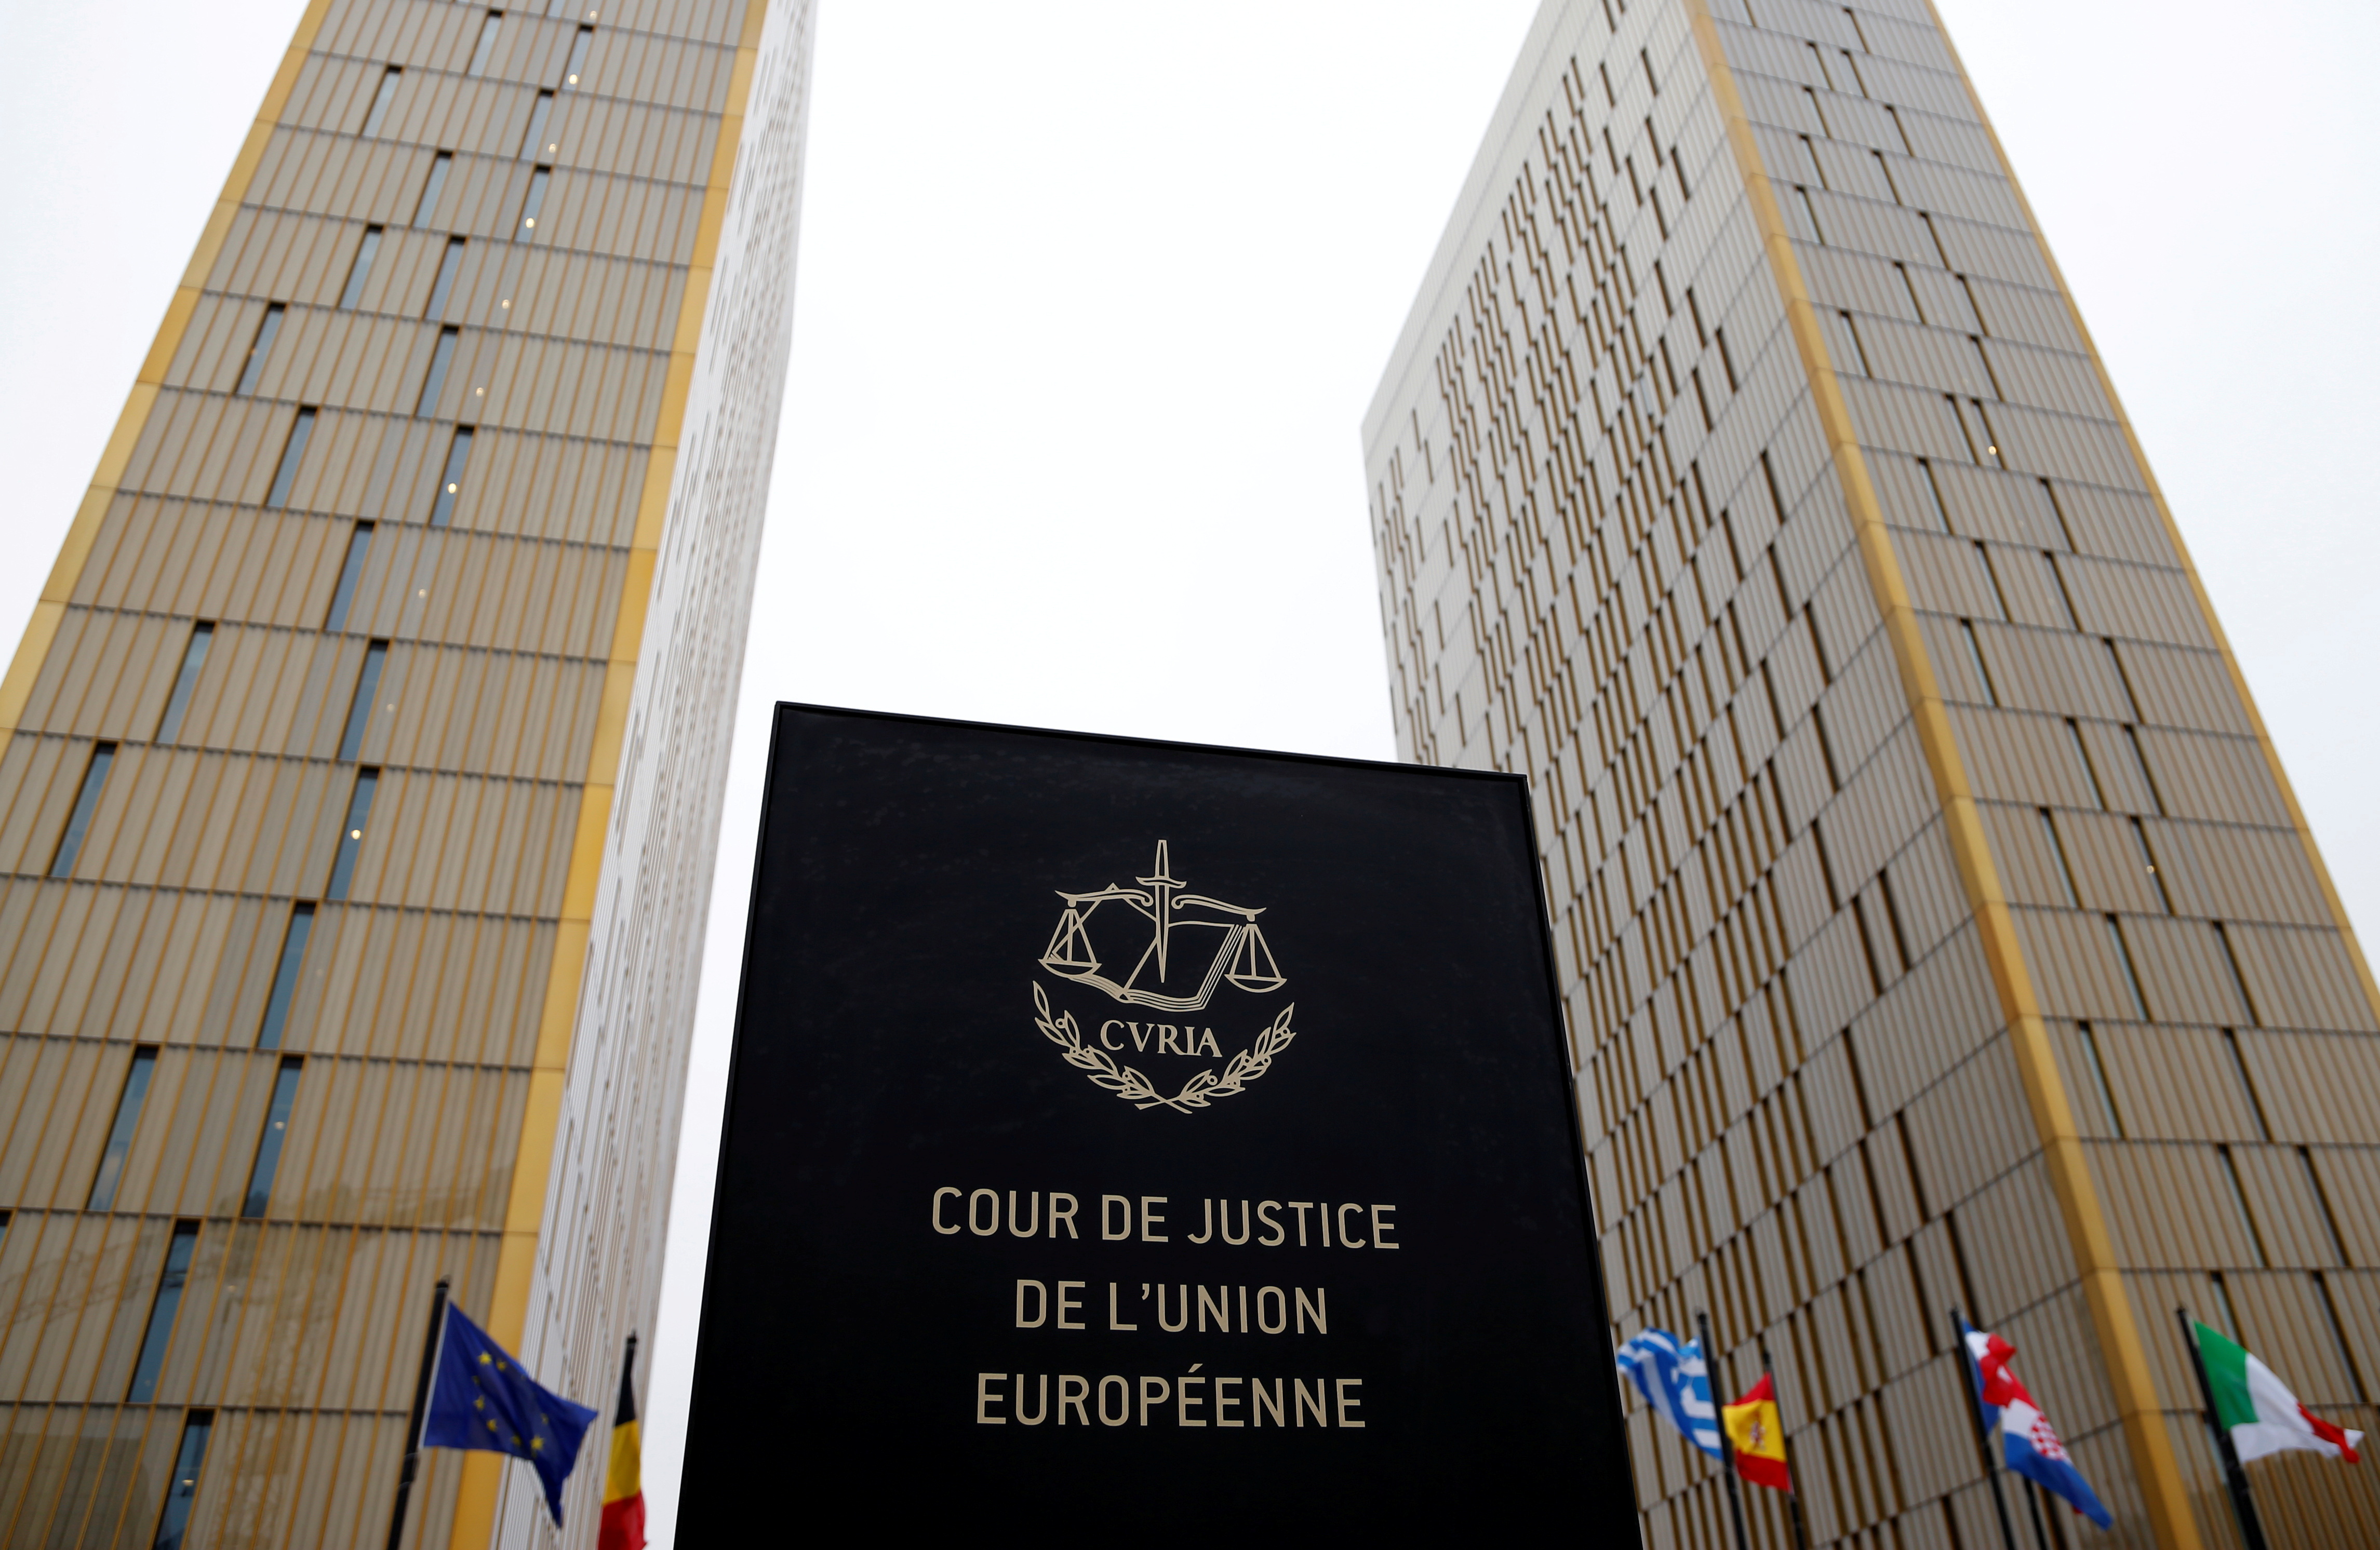 The towers of the European Court of Justice are seen in Luxembourg, January 26, 2017. REUTERS/Francois Lenoir/File Photo